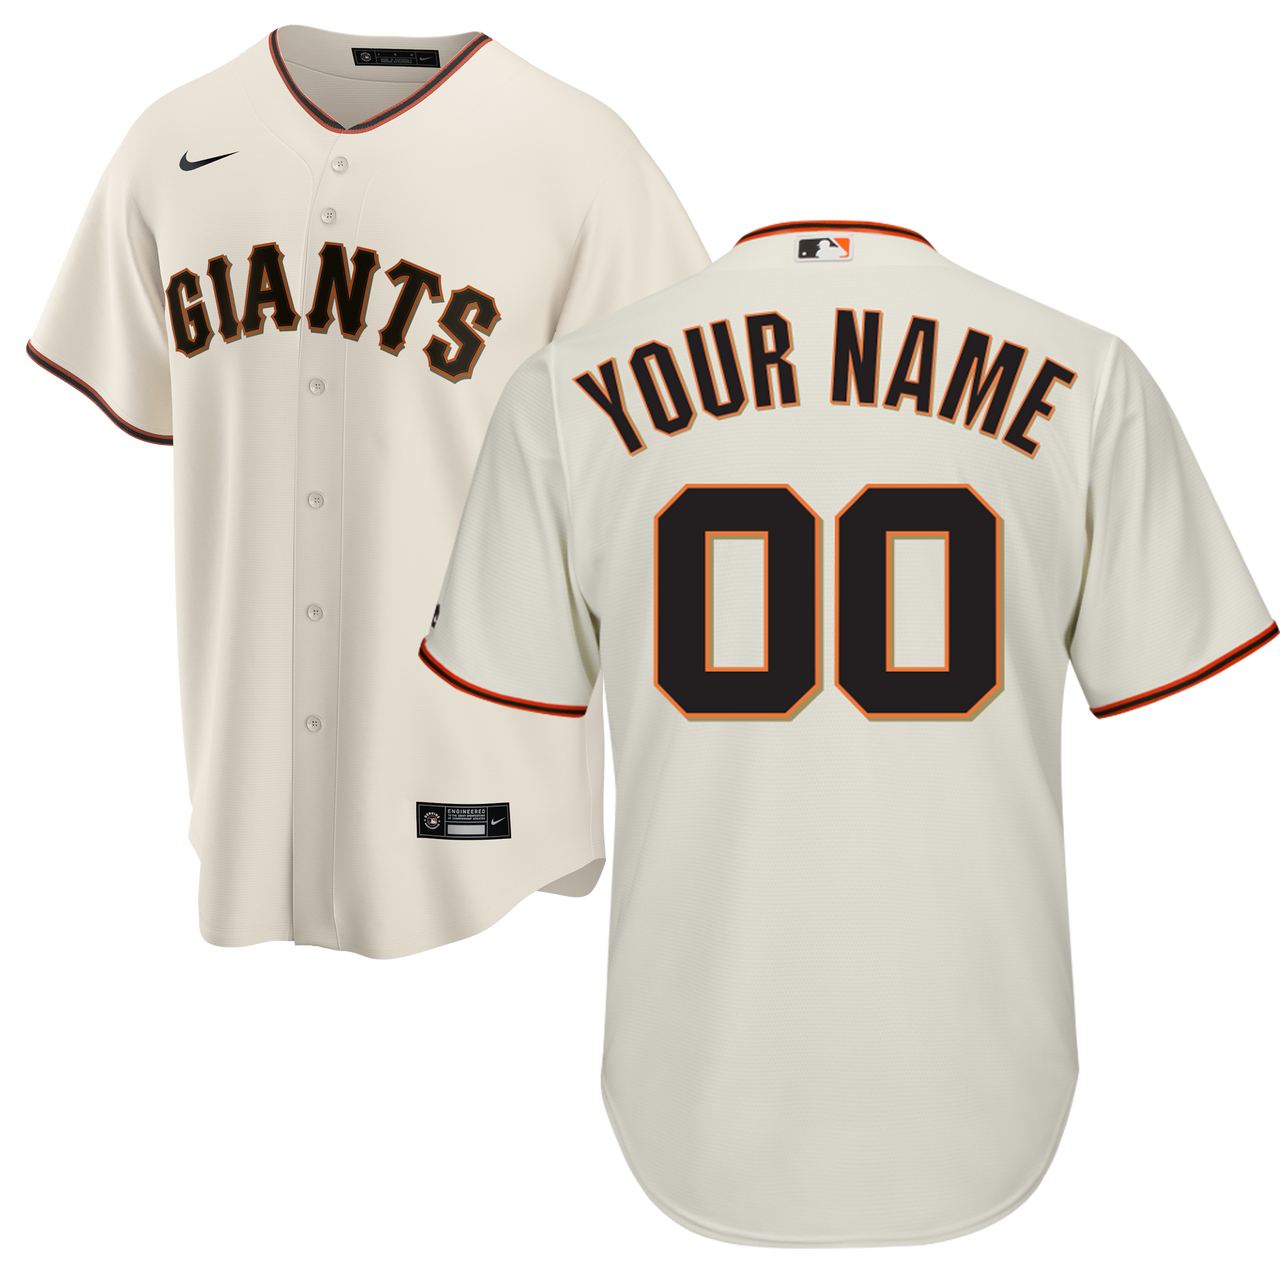 San Francisco Giants Throwback Jersey Extra-Small